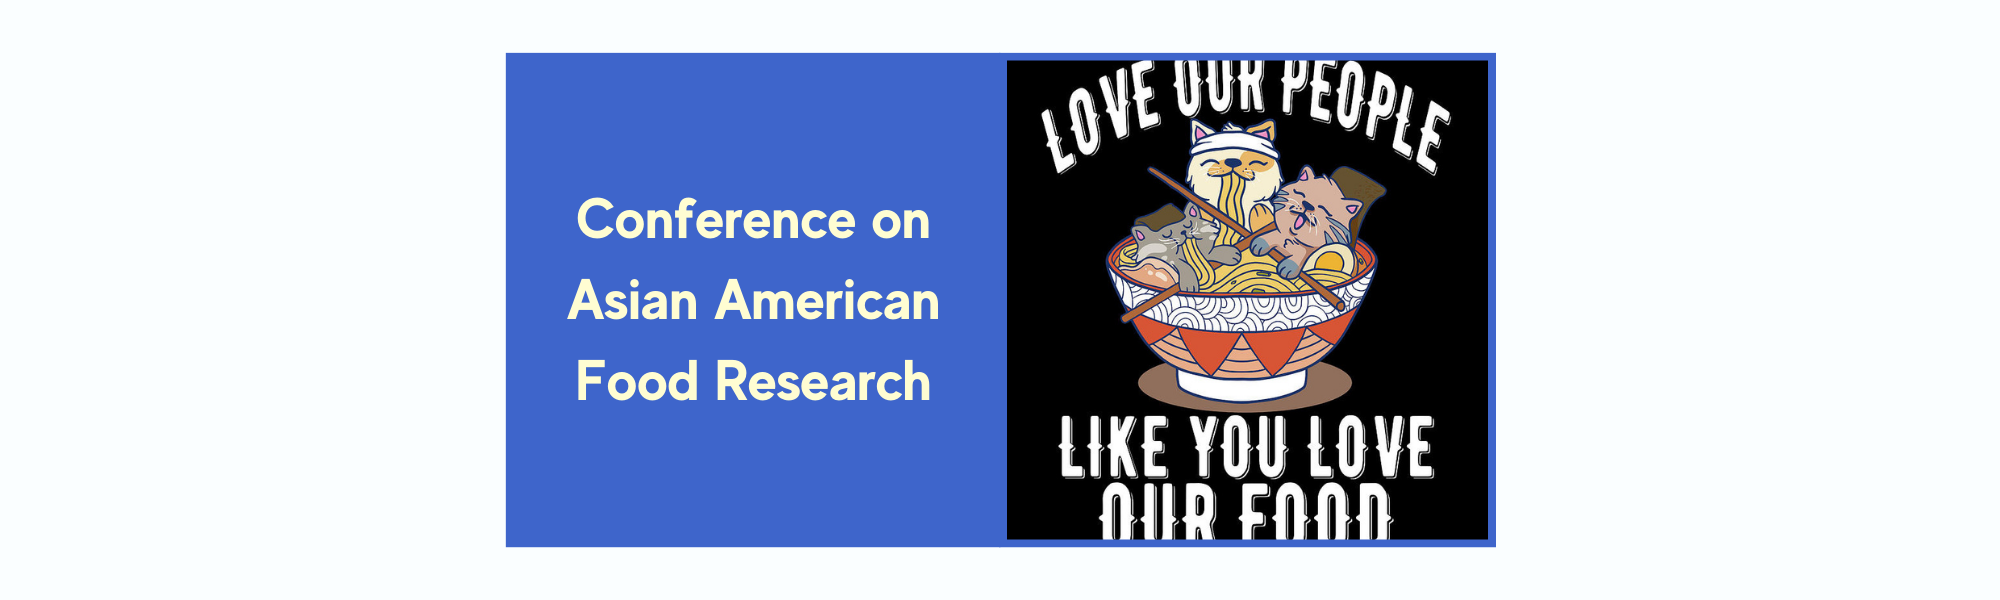 Conference-on-Asian-American-Food-Research.png